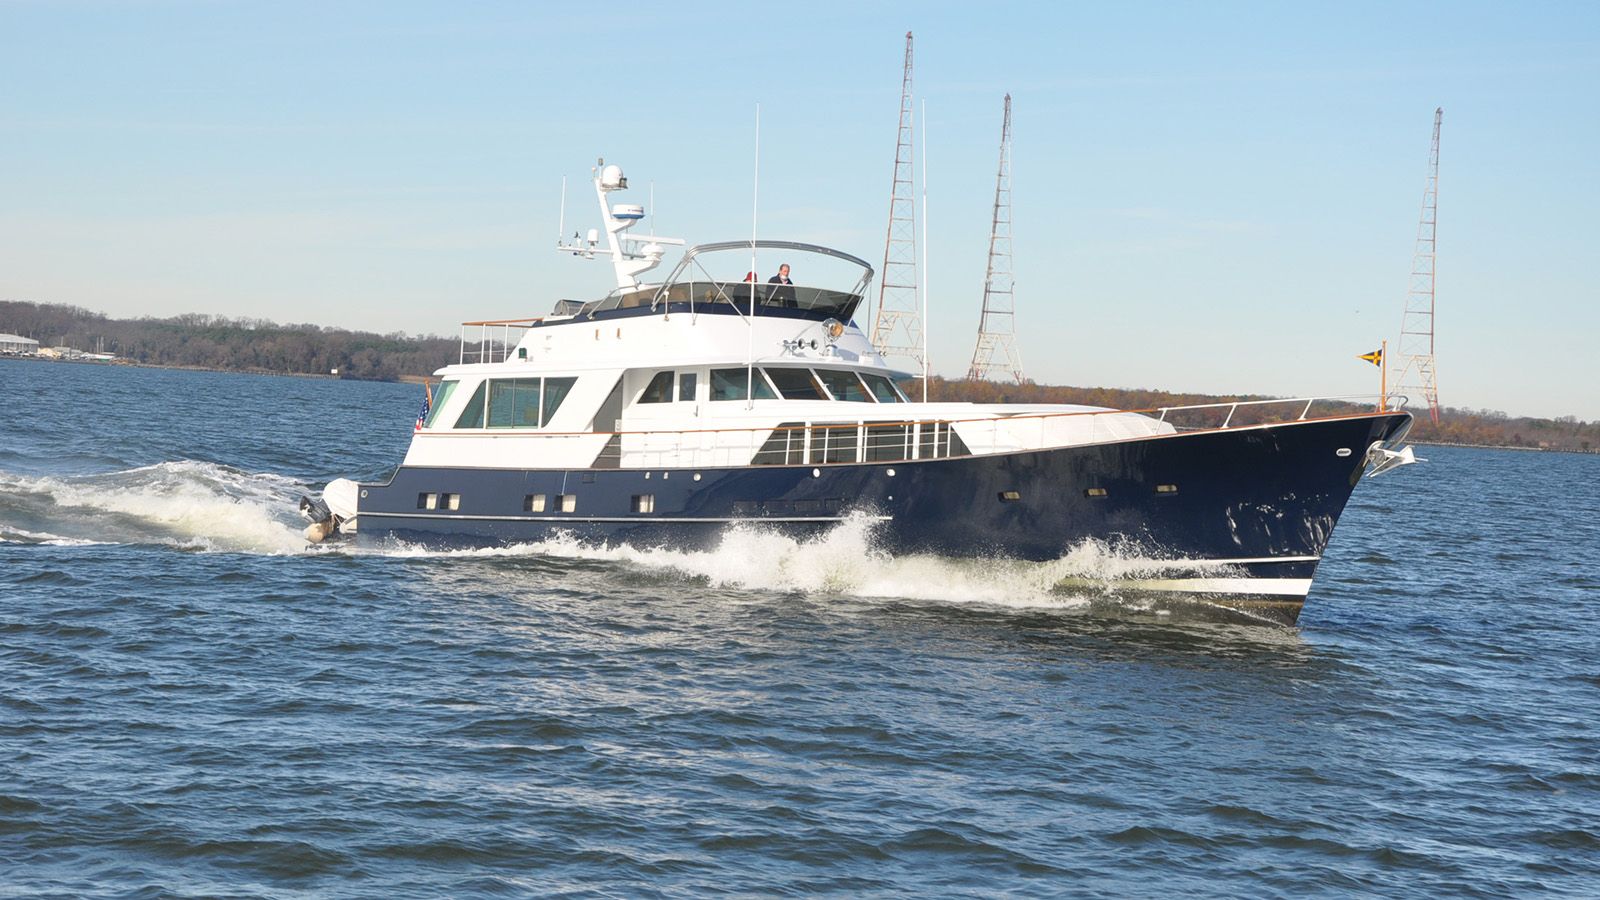 83' /25.3m Burger Boat SERENITY for Sale with IYC